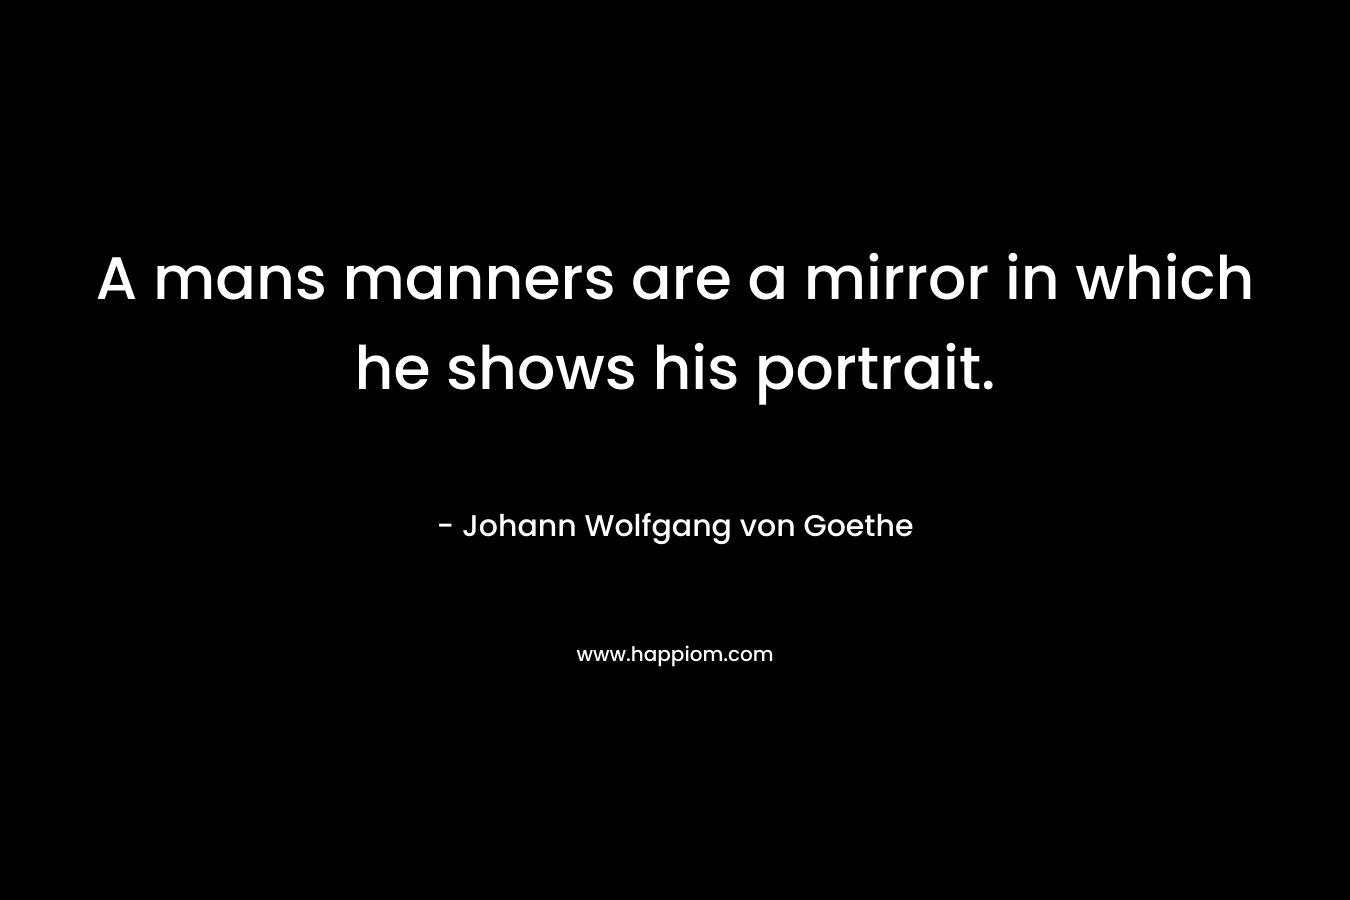 A mans manners are a mirror in which he shows his portrait.